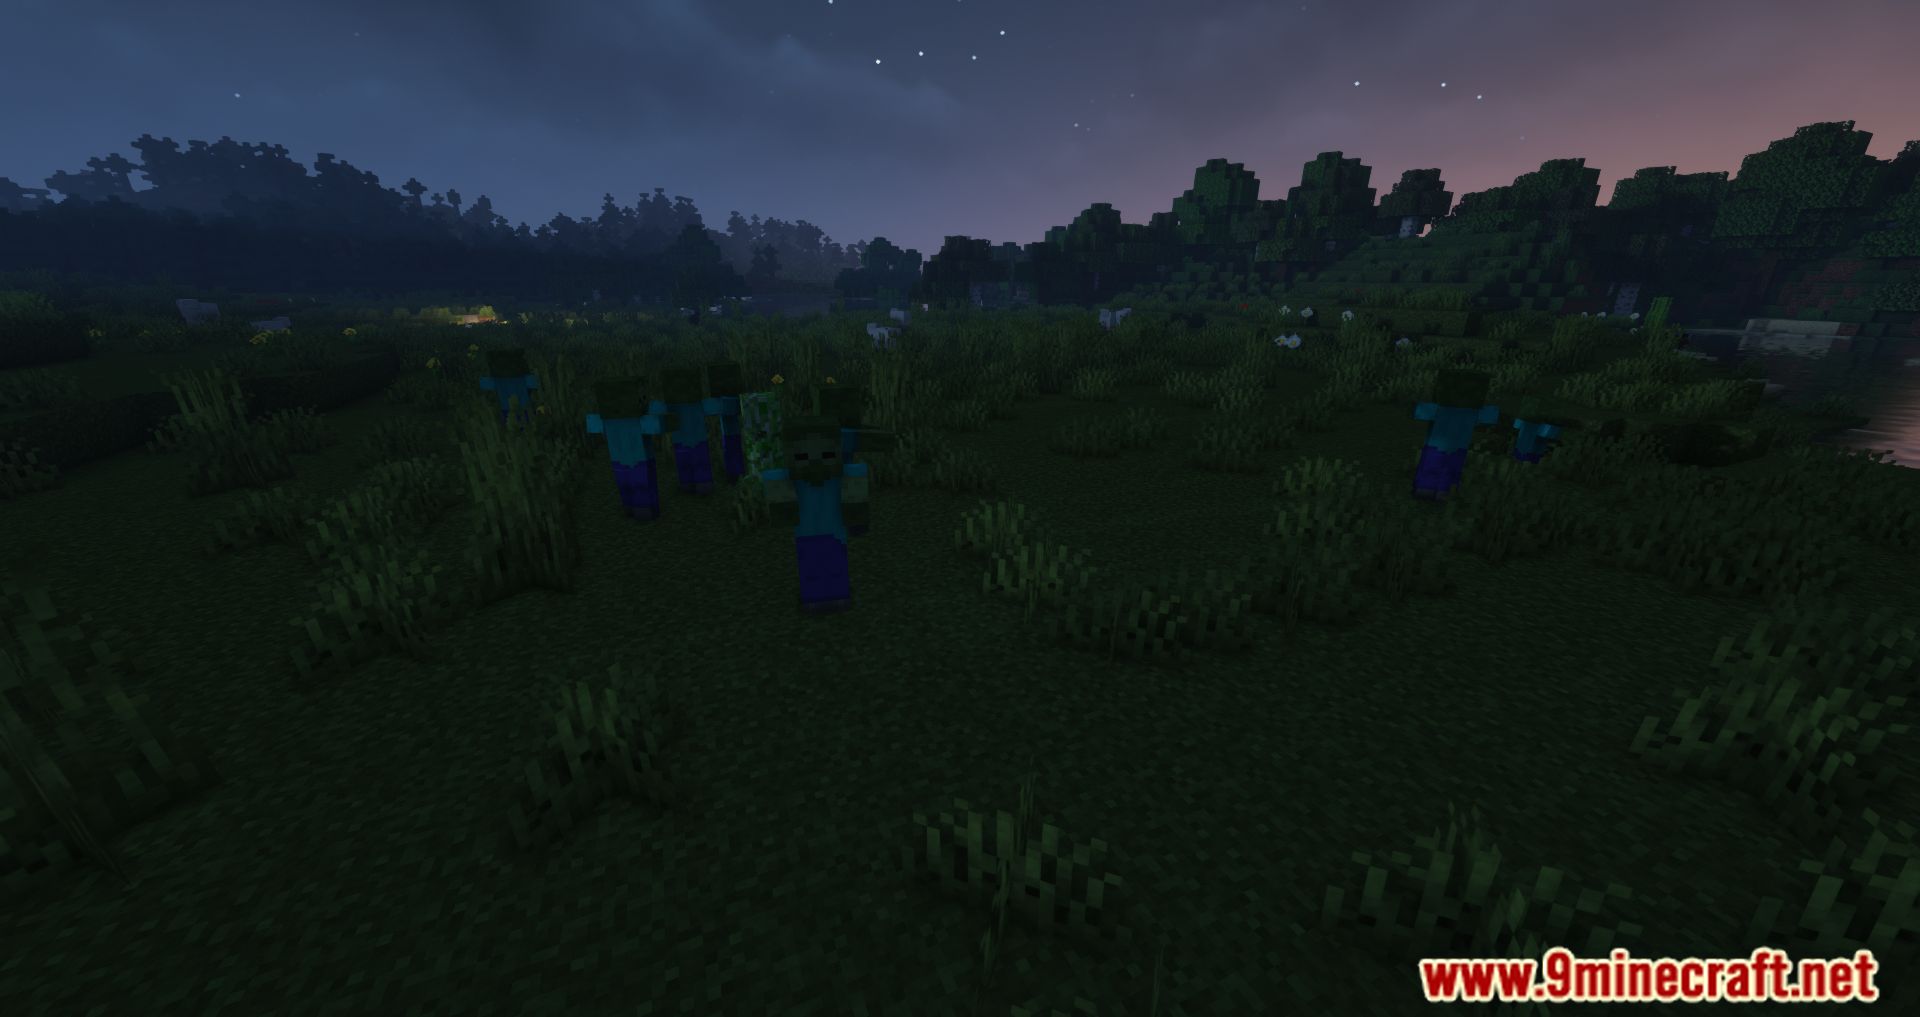 Well-Behaved Mobs Mod (1.16.5, 1.15.2) - Minor Tweaks To The Behavior Of A Few Mobs 6